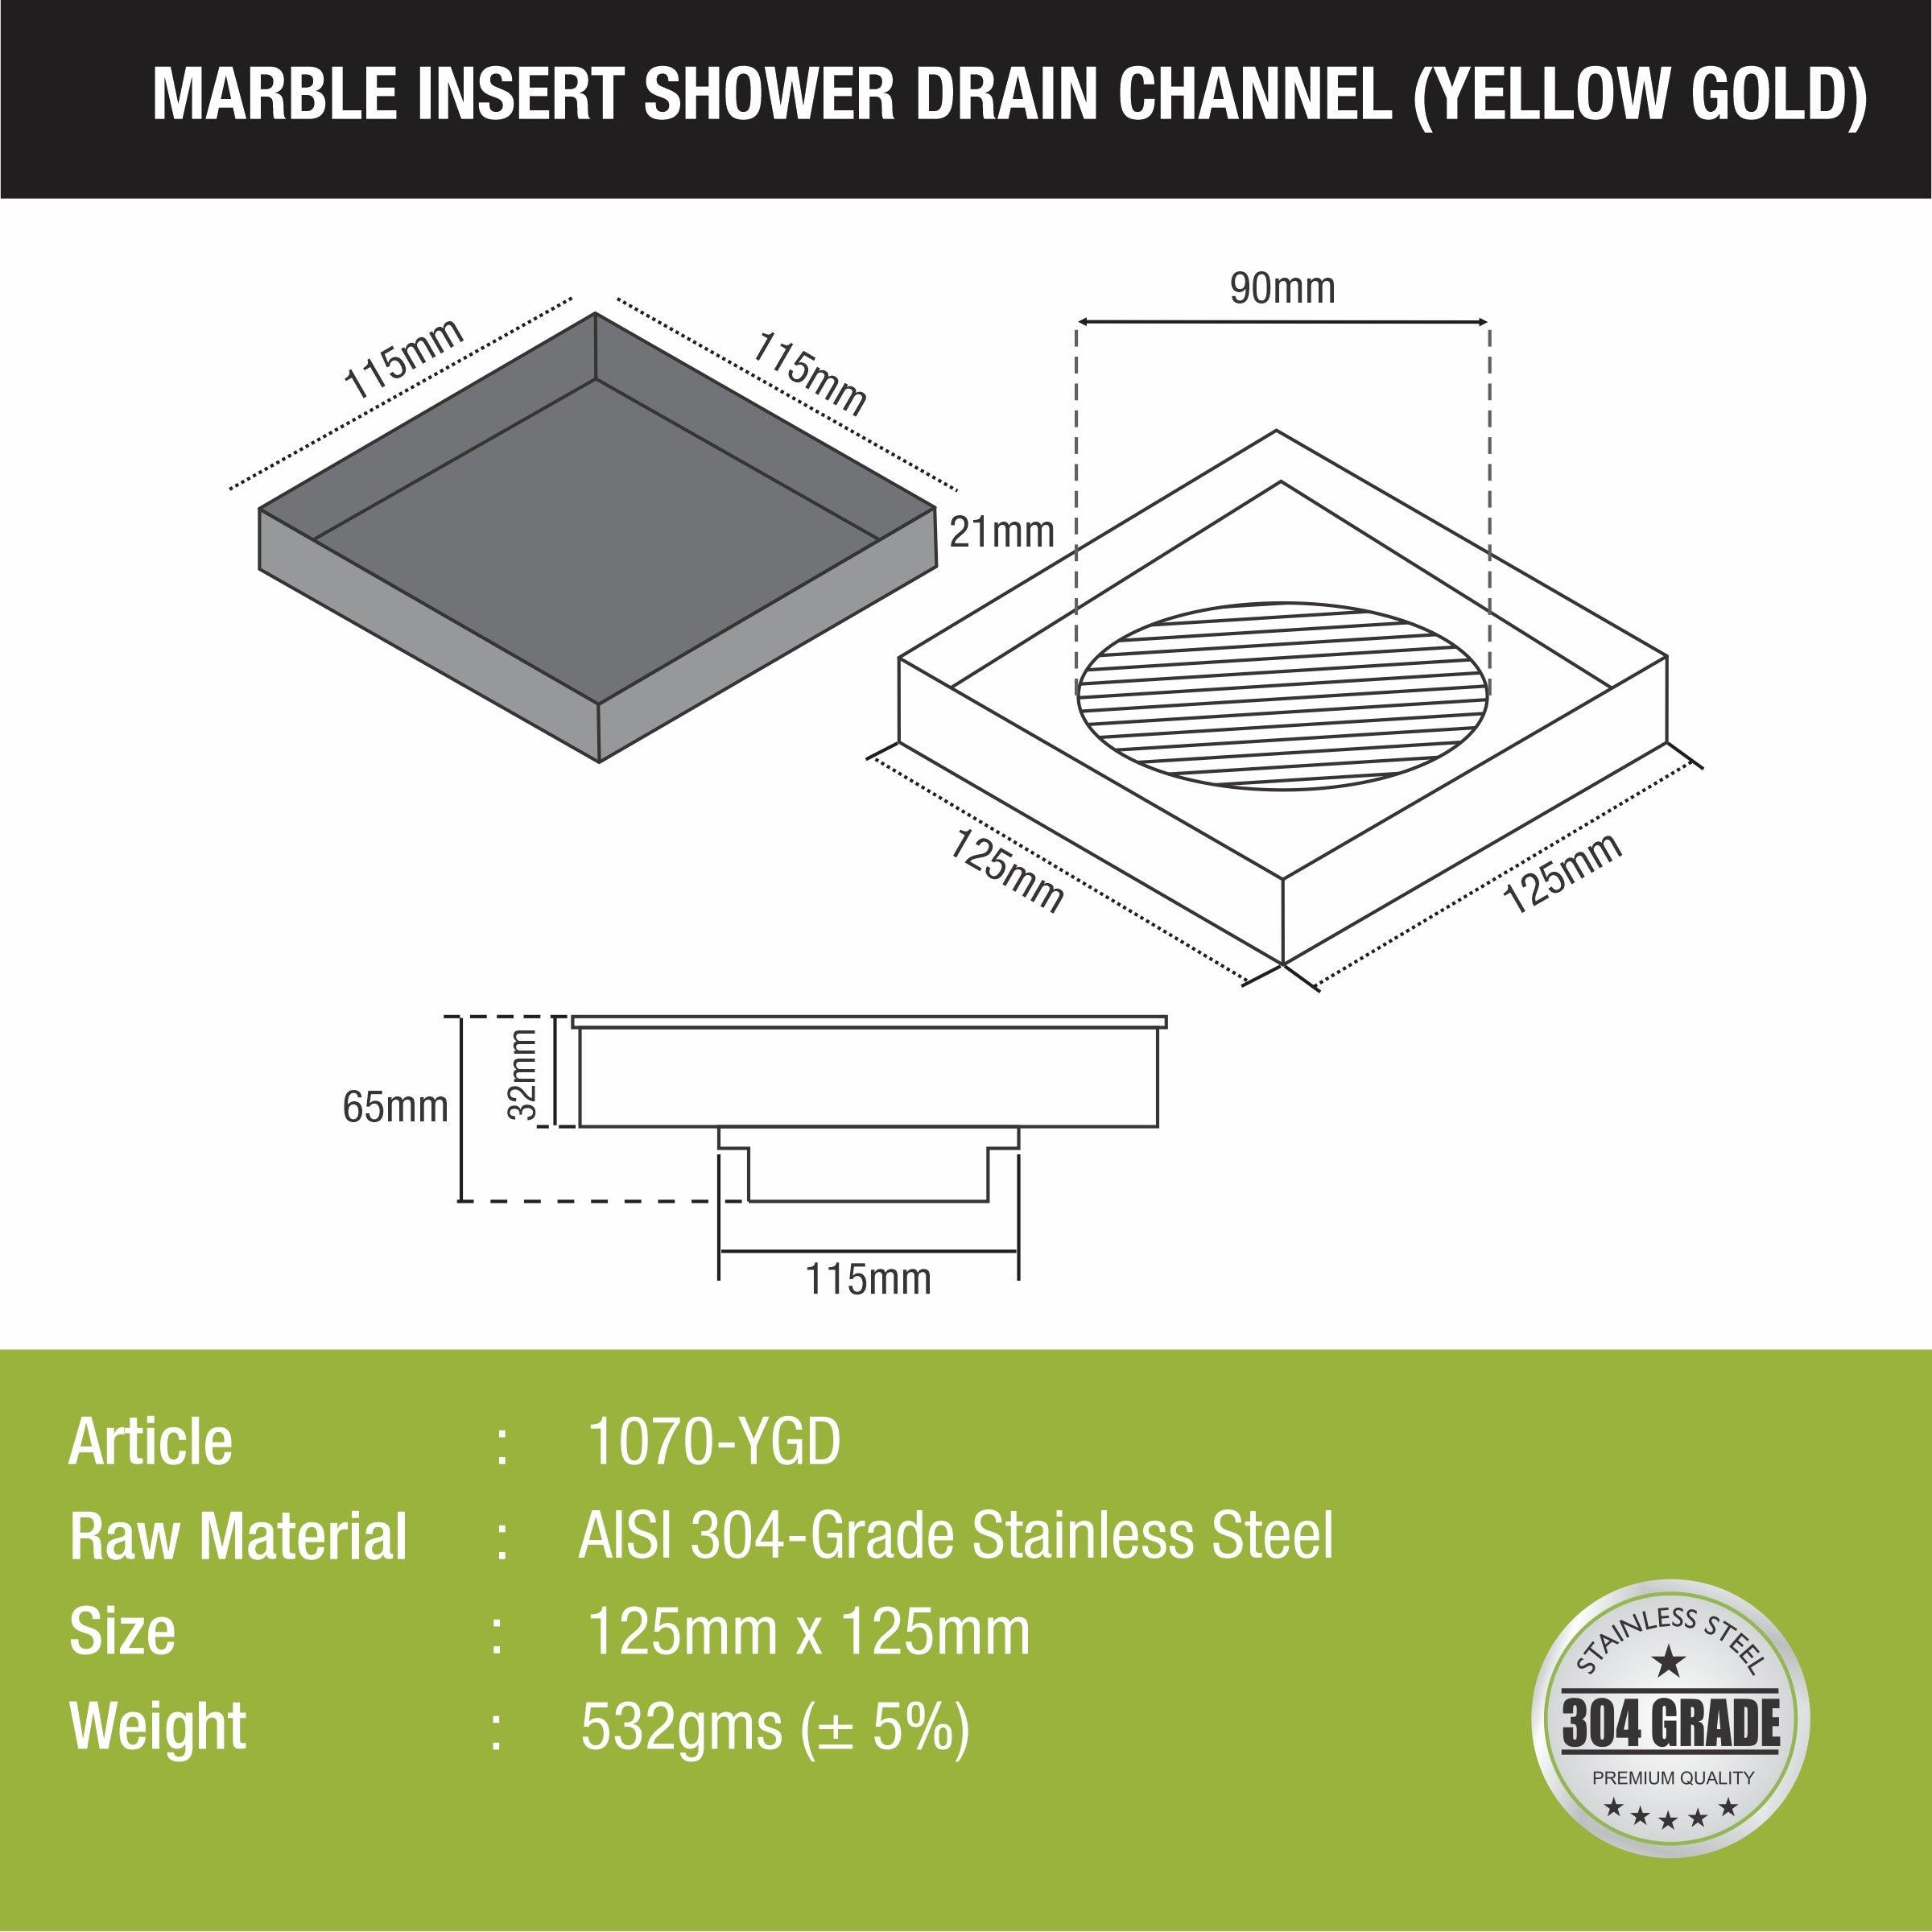 Marble Insert Square Floor Drain - Yellow Gold (5 x 5 Inches) sizes and dimensions